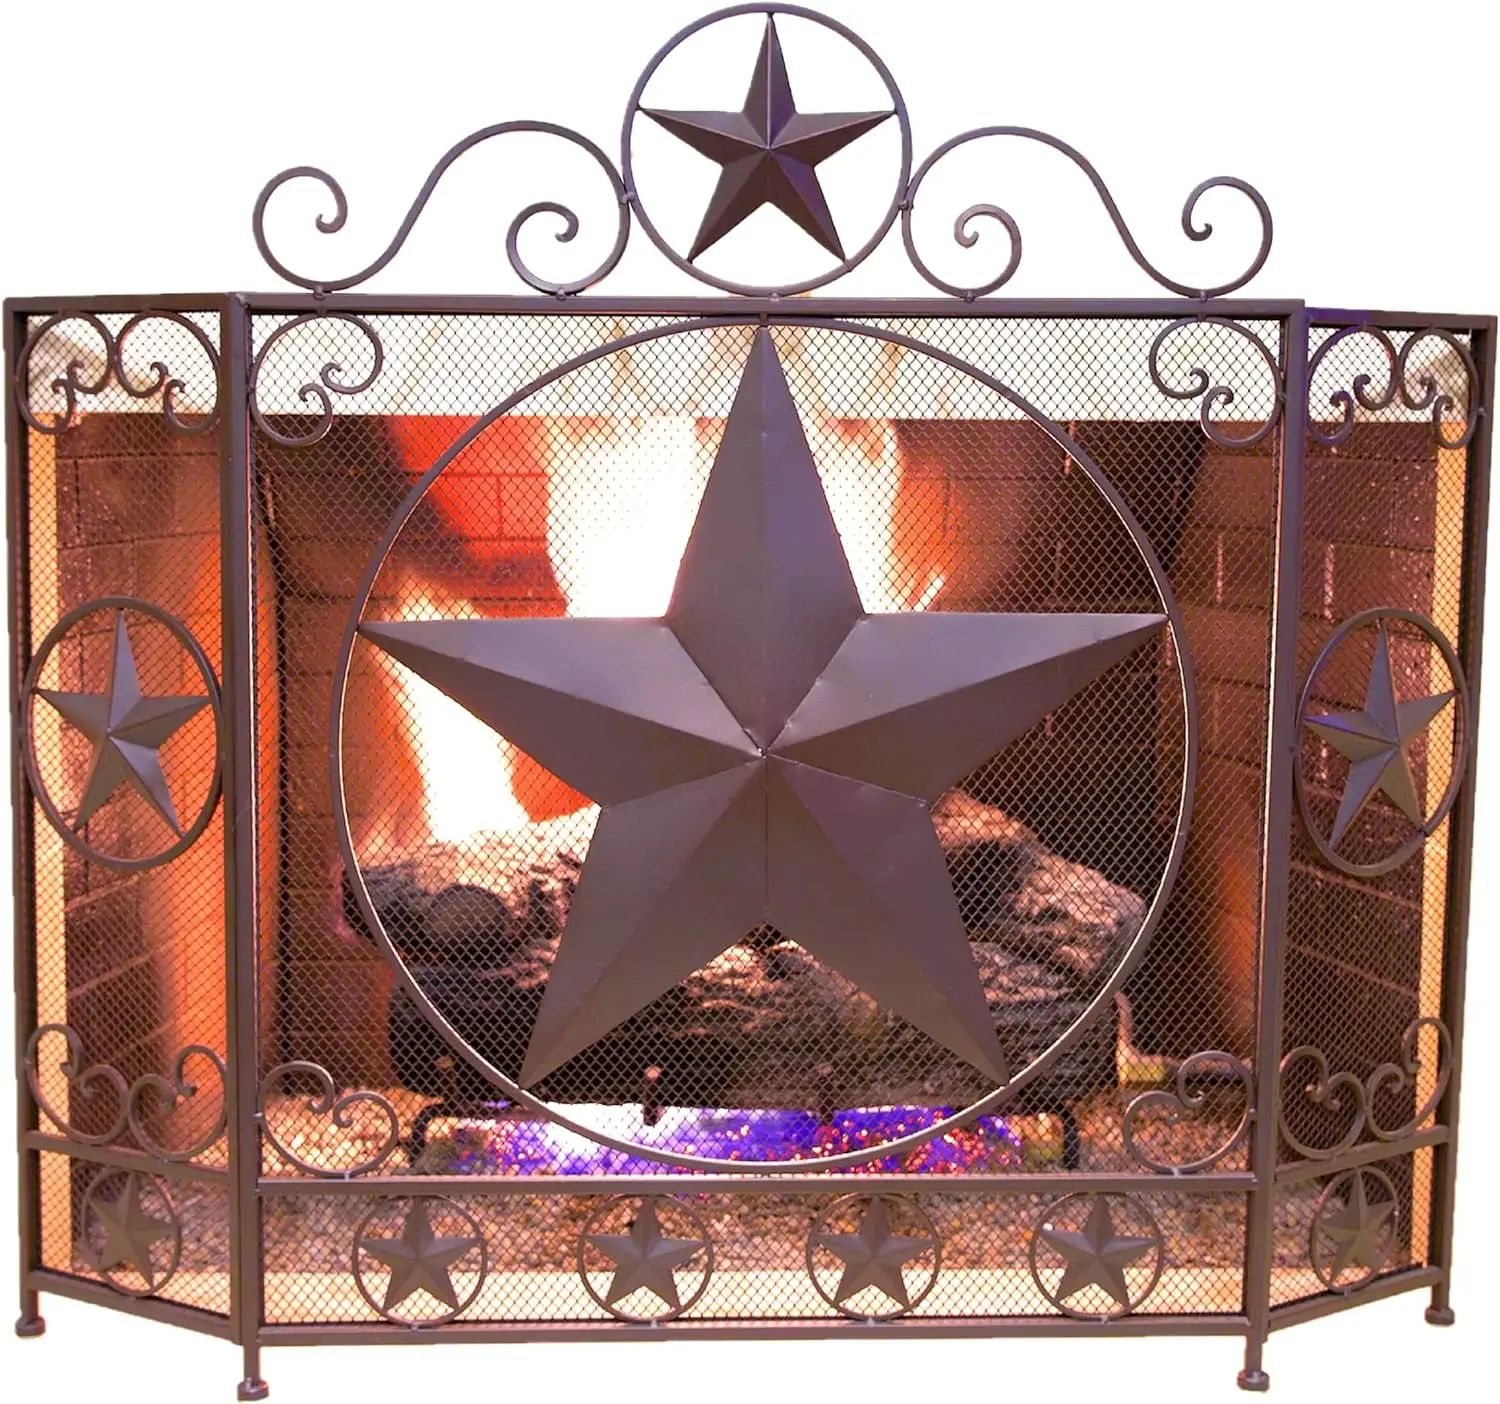 

Metal Foldable Fireplace Screen with Star in Brown Metal Mesh Rustic Western Country Style